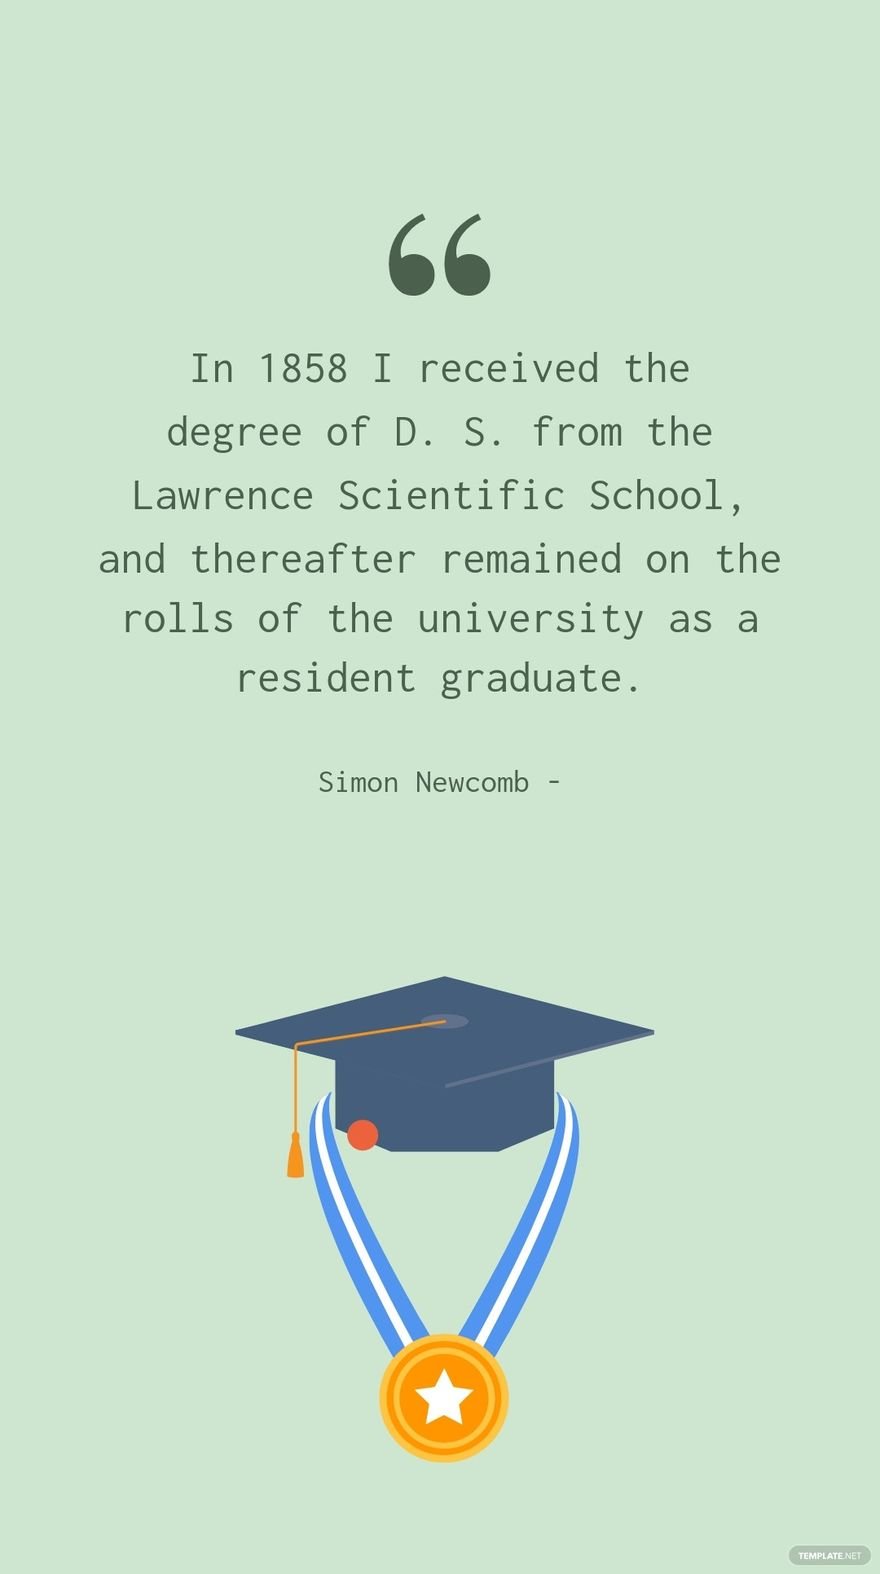 Free Simon Newcomb - In 1858 I received the degree of D. S. from the Lawrence Scientific School, and thereafter remained on the rolls of the university as a resident graduate.